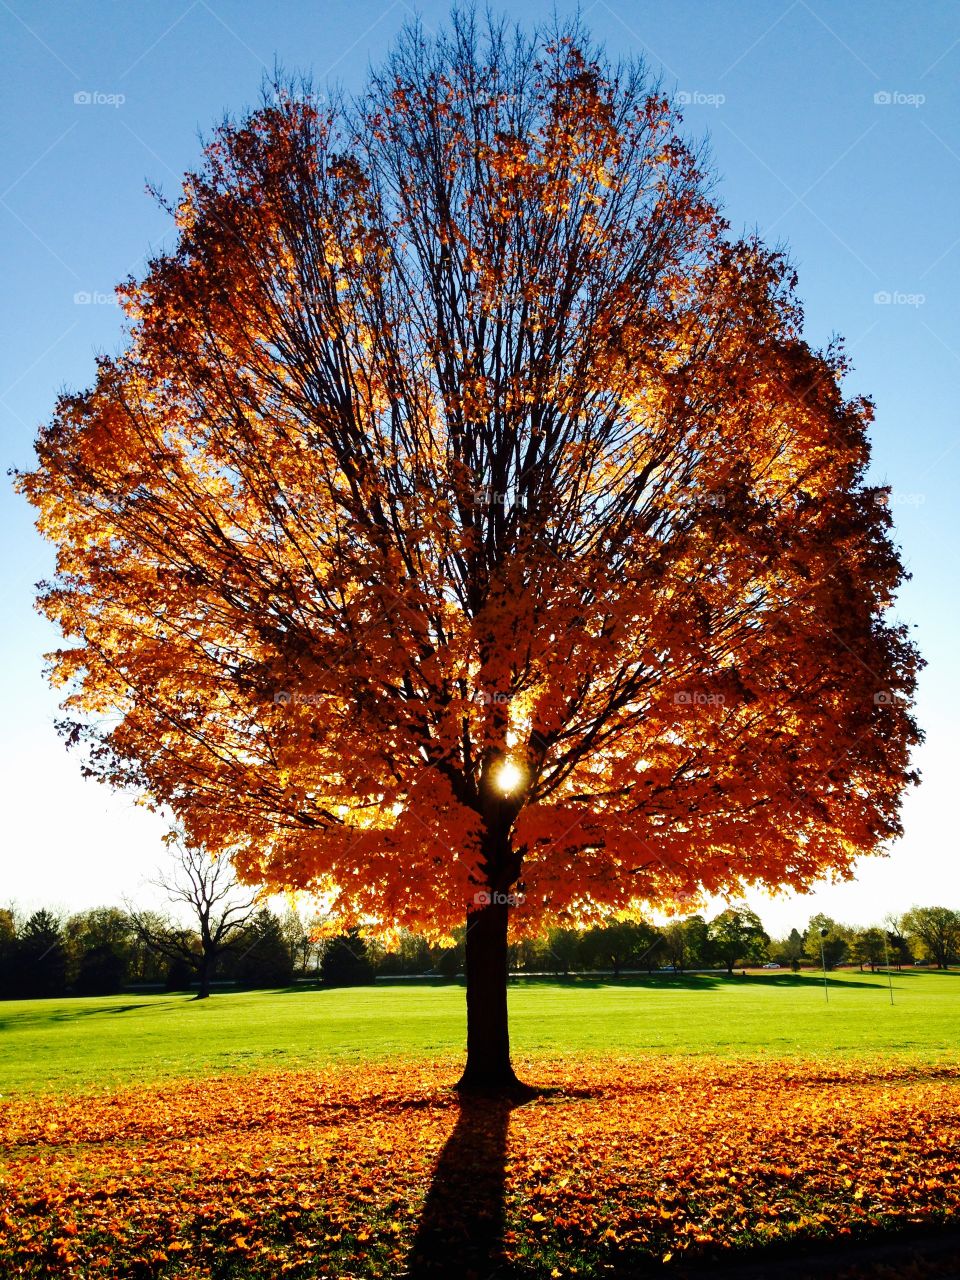 View of a autumn tree